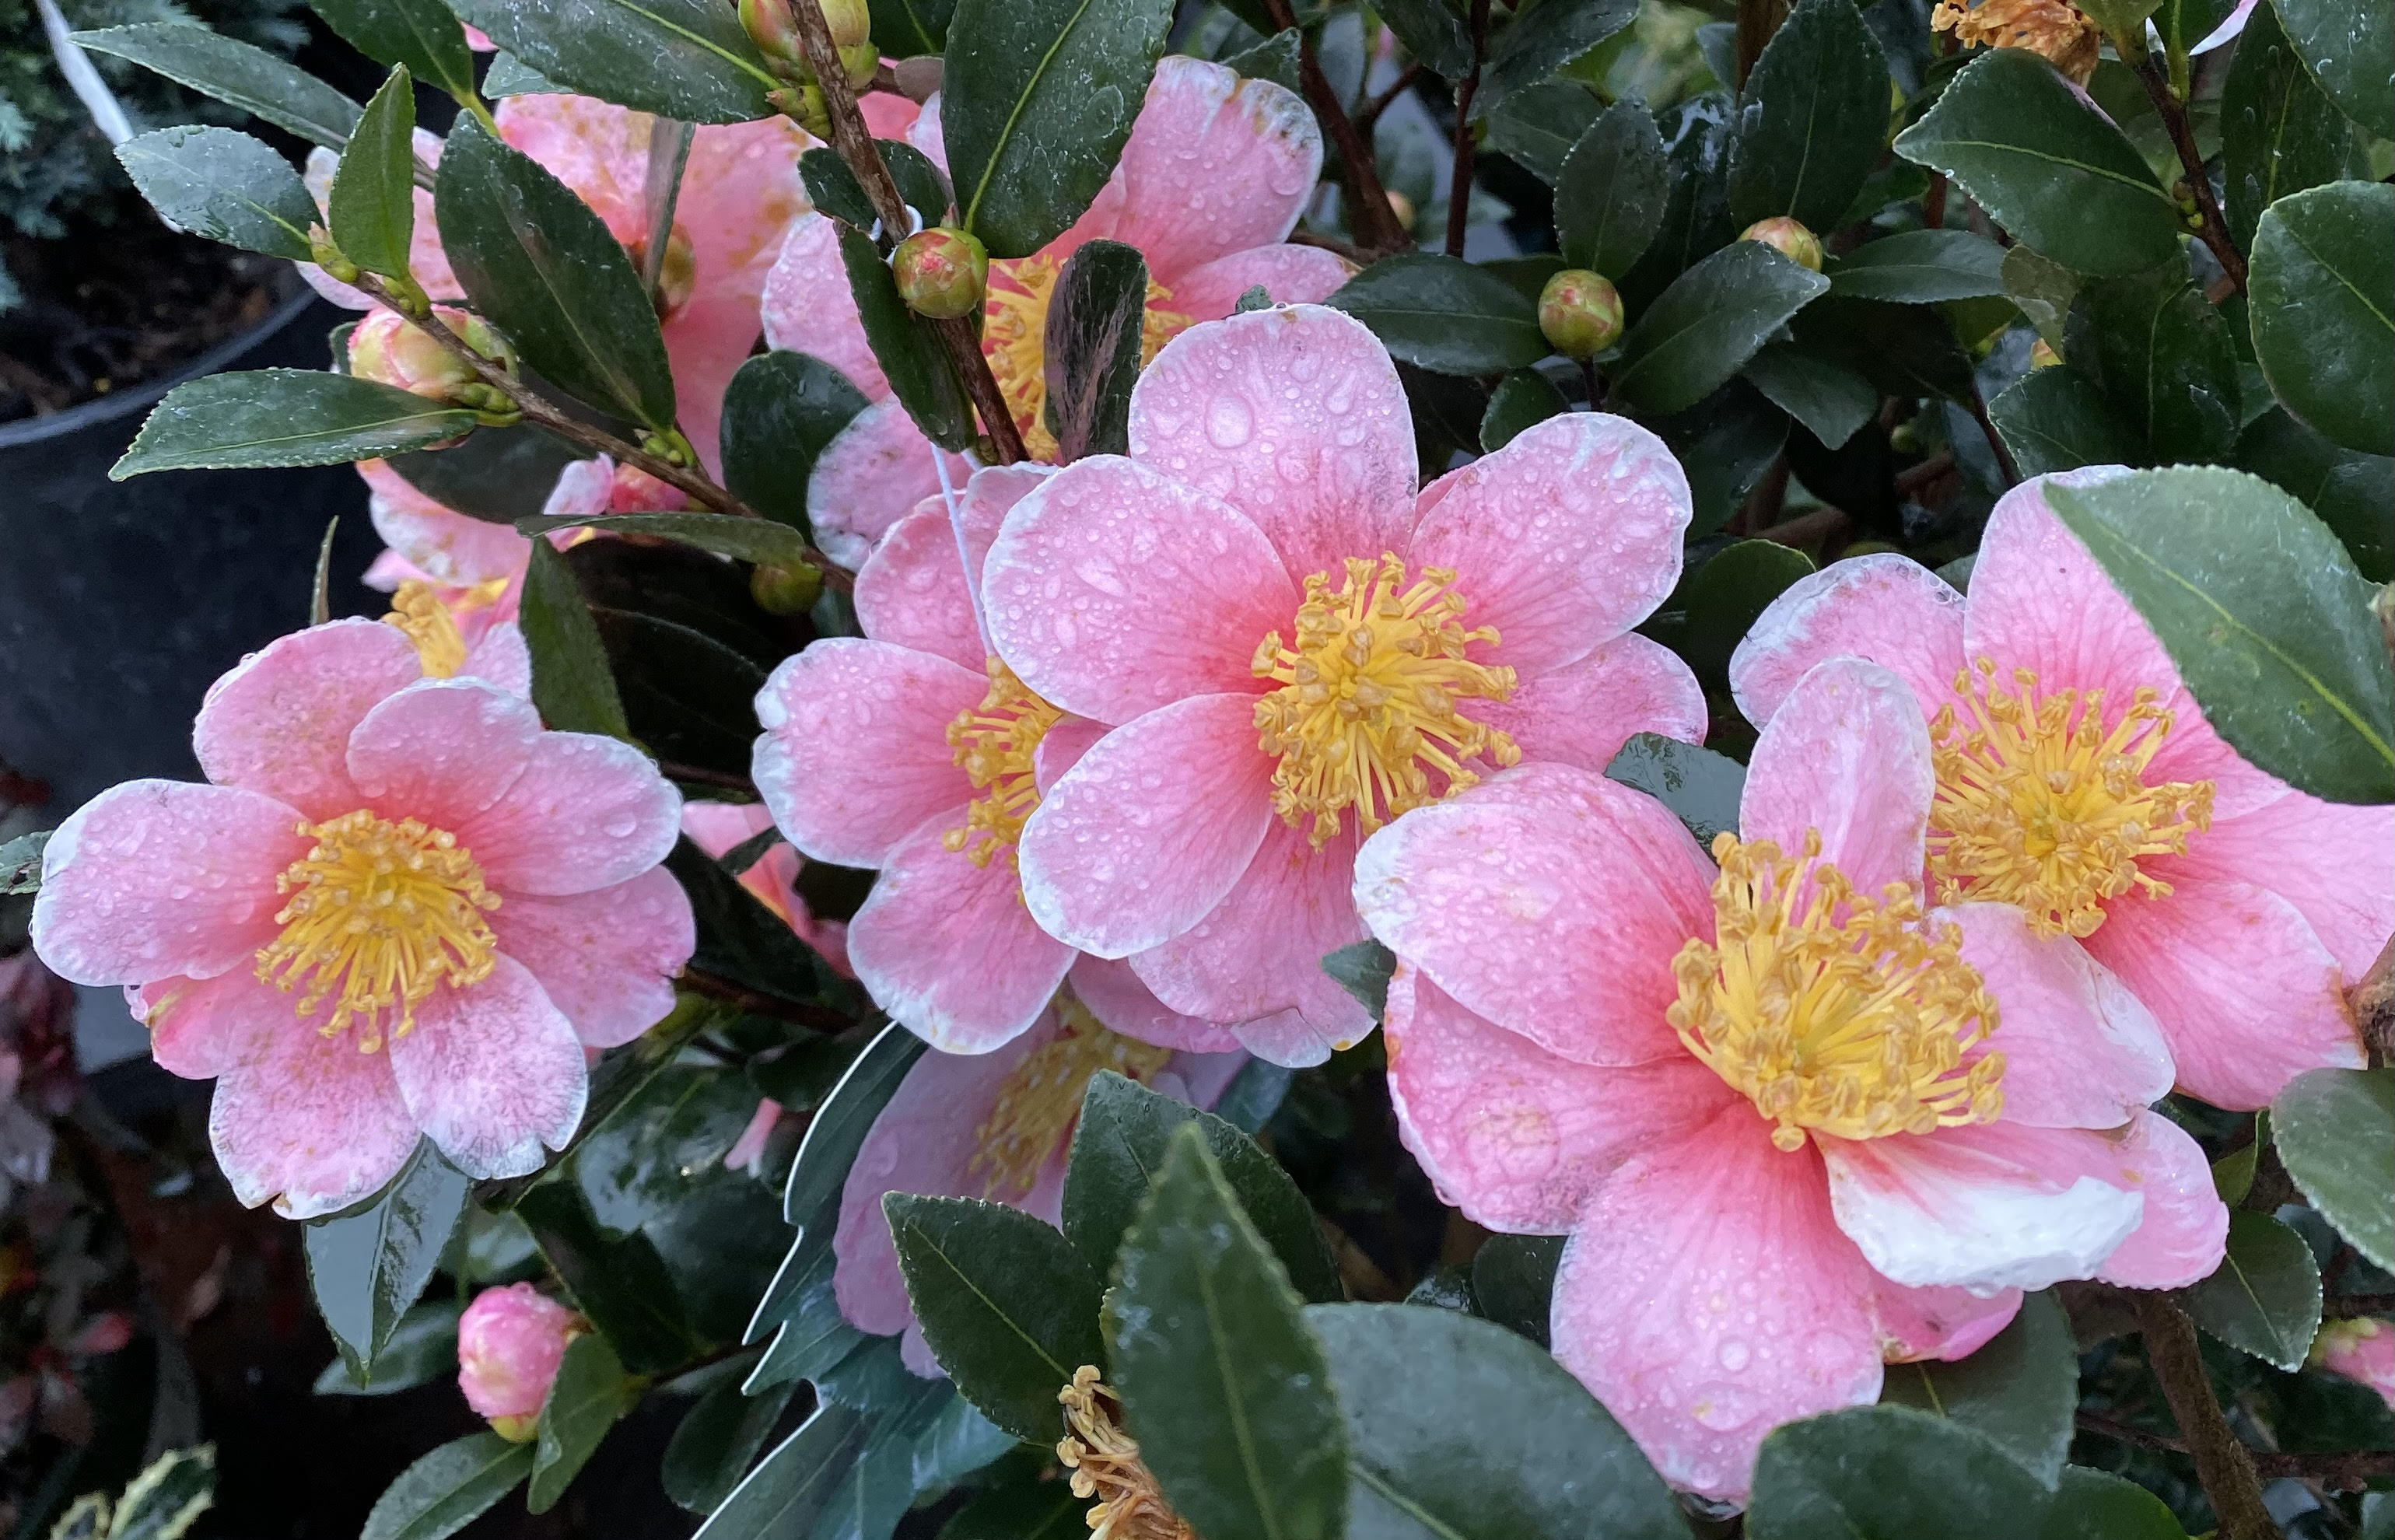 Water droplets dot pink petals on a cluster of camellias.